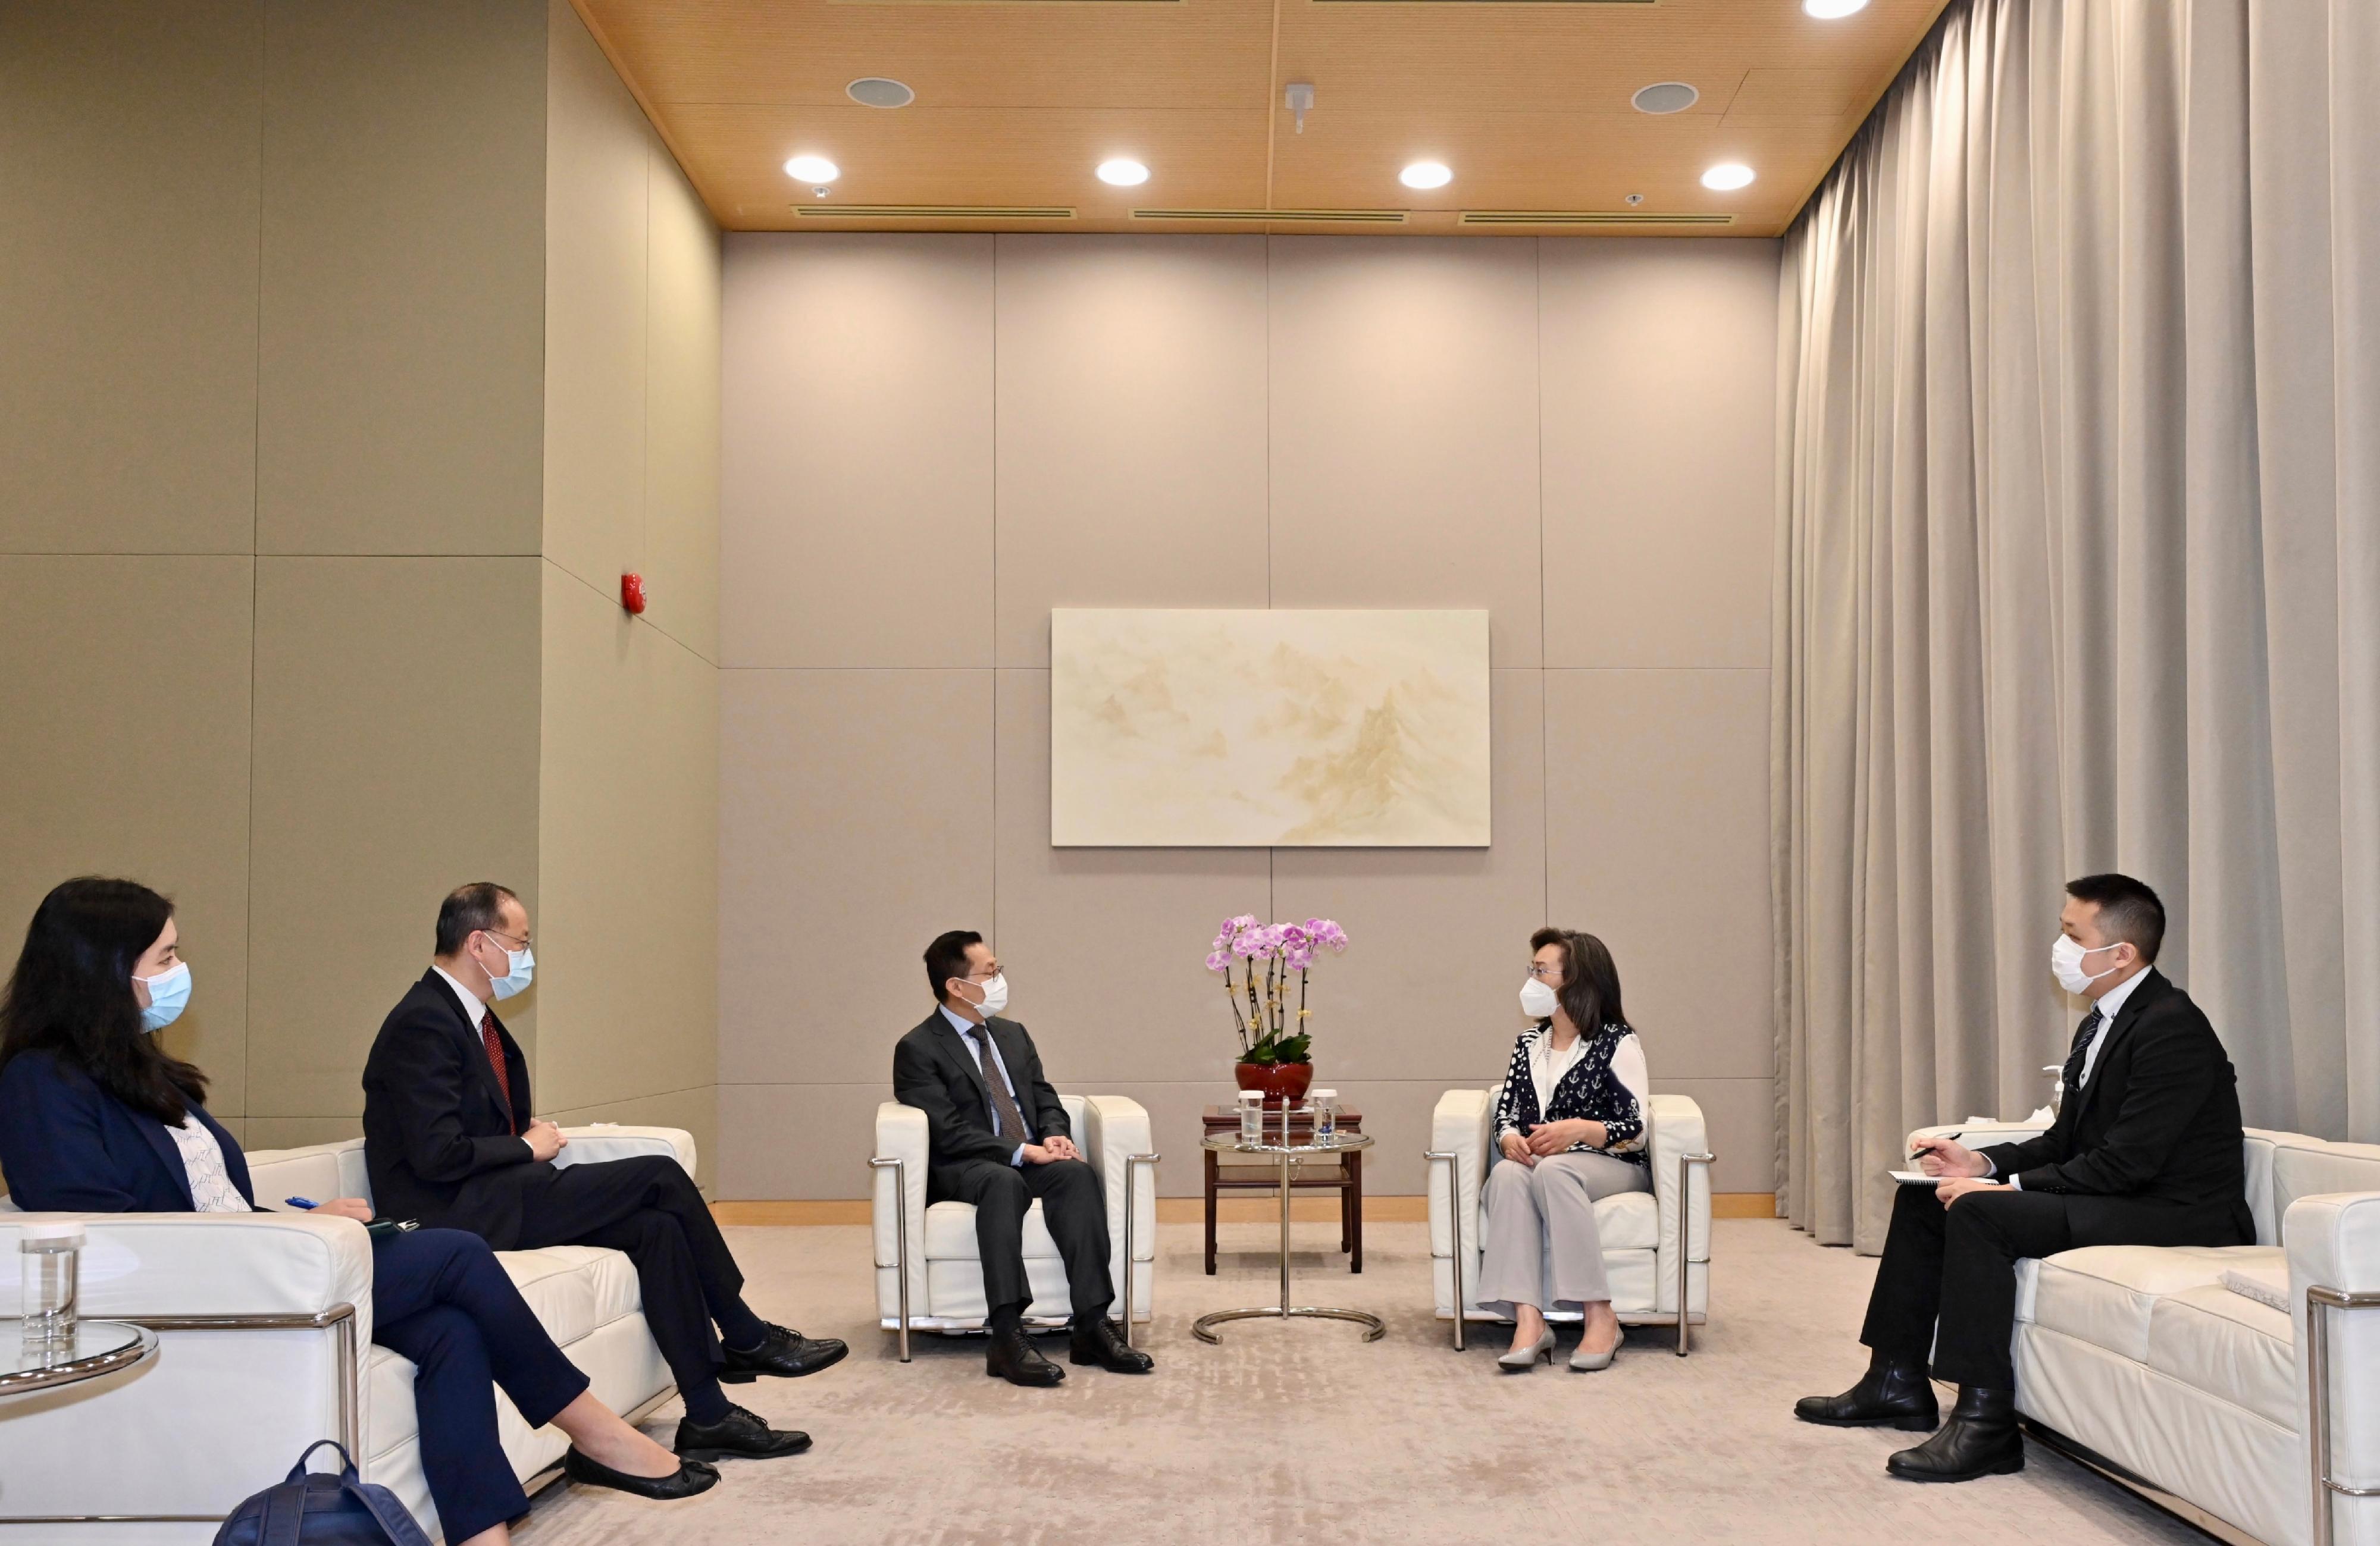 The Secretary for the Civil Service, Mrs Ingrid Yeung (second right), meets with the Head of Civil Service of Singapore, Mr Leo Yip (third right), at the Central Government Offices today (July 20). While reciprocal visits between the civil services could not be materialised in the past two years under the COVID-19 epidemic, Mrs Yeung looks forward to resuming and enhancing exchanges and co-operation between the two places in future. The Consul-General of the Republic of Singapore in Hong Kong, Mr Ong Siew Gay (second left), was also present at the meeting.